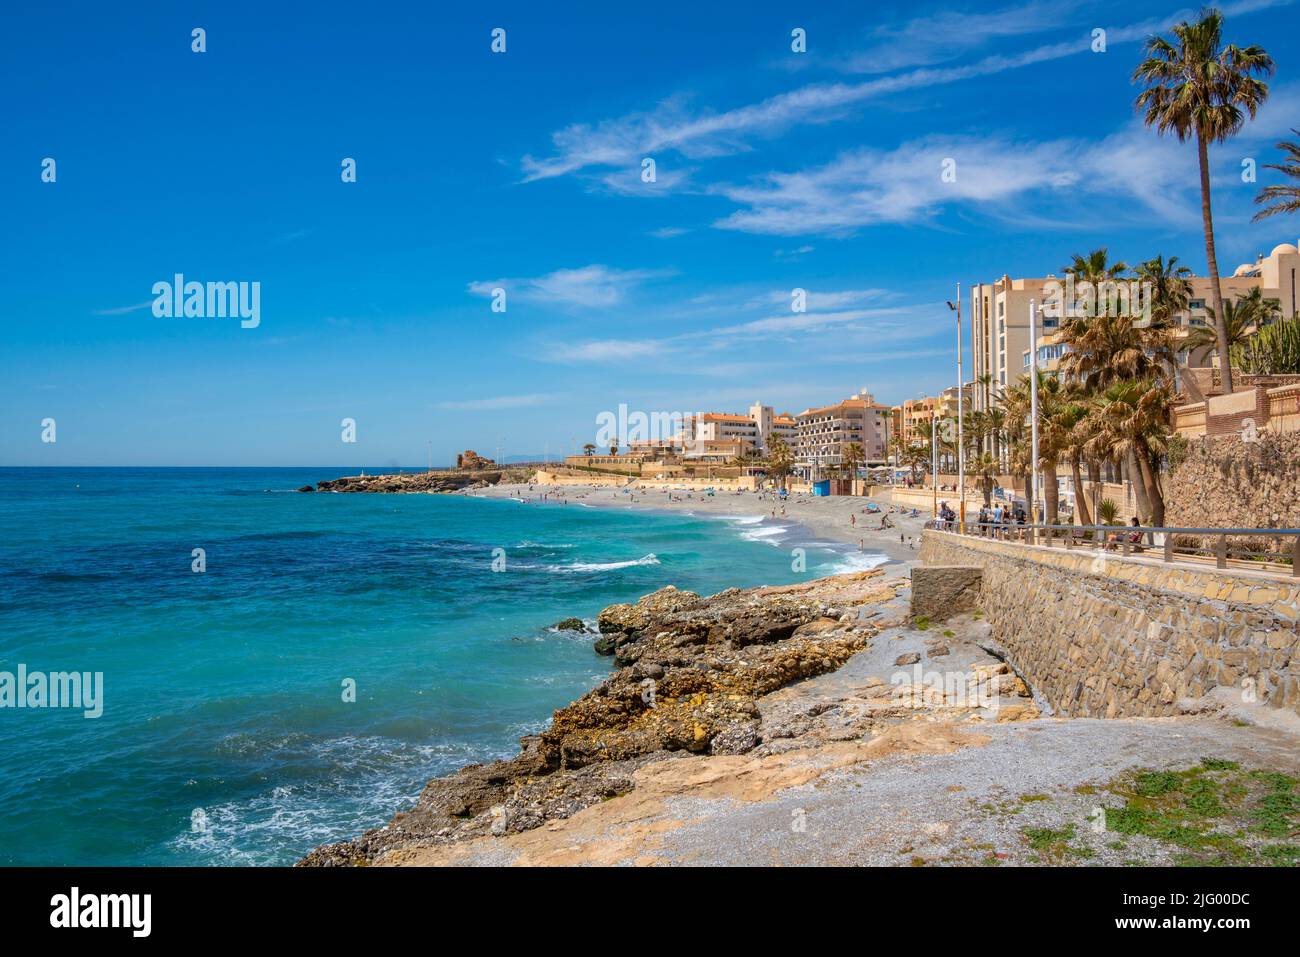 View of beach, hotels and coast at Nerja, Nerja, Malaga Province, Andalucia, Spain, Mediterranean, Europe Stock Photo